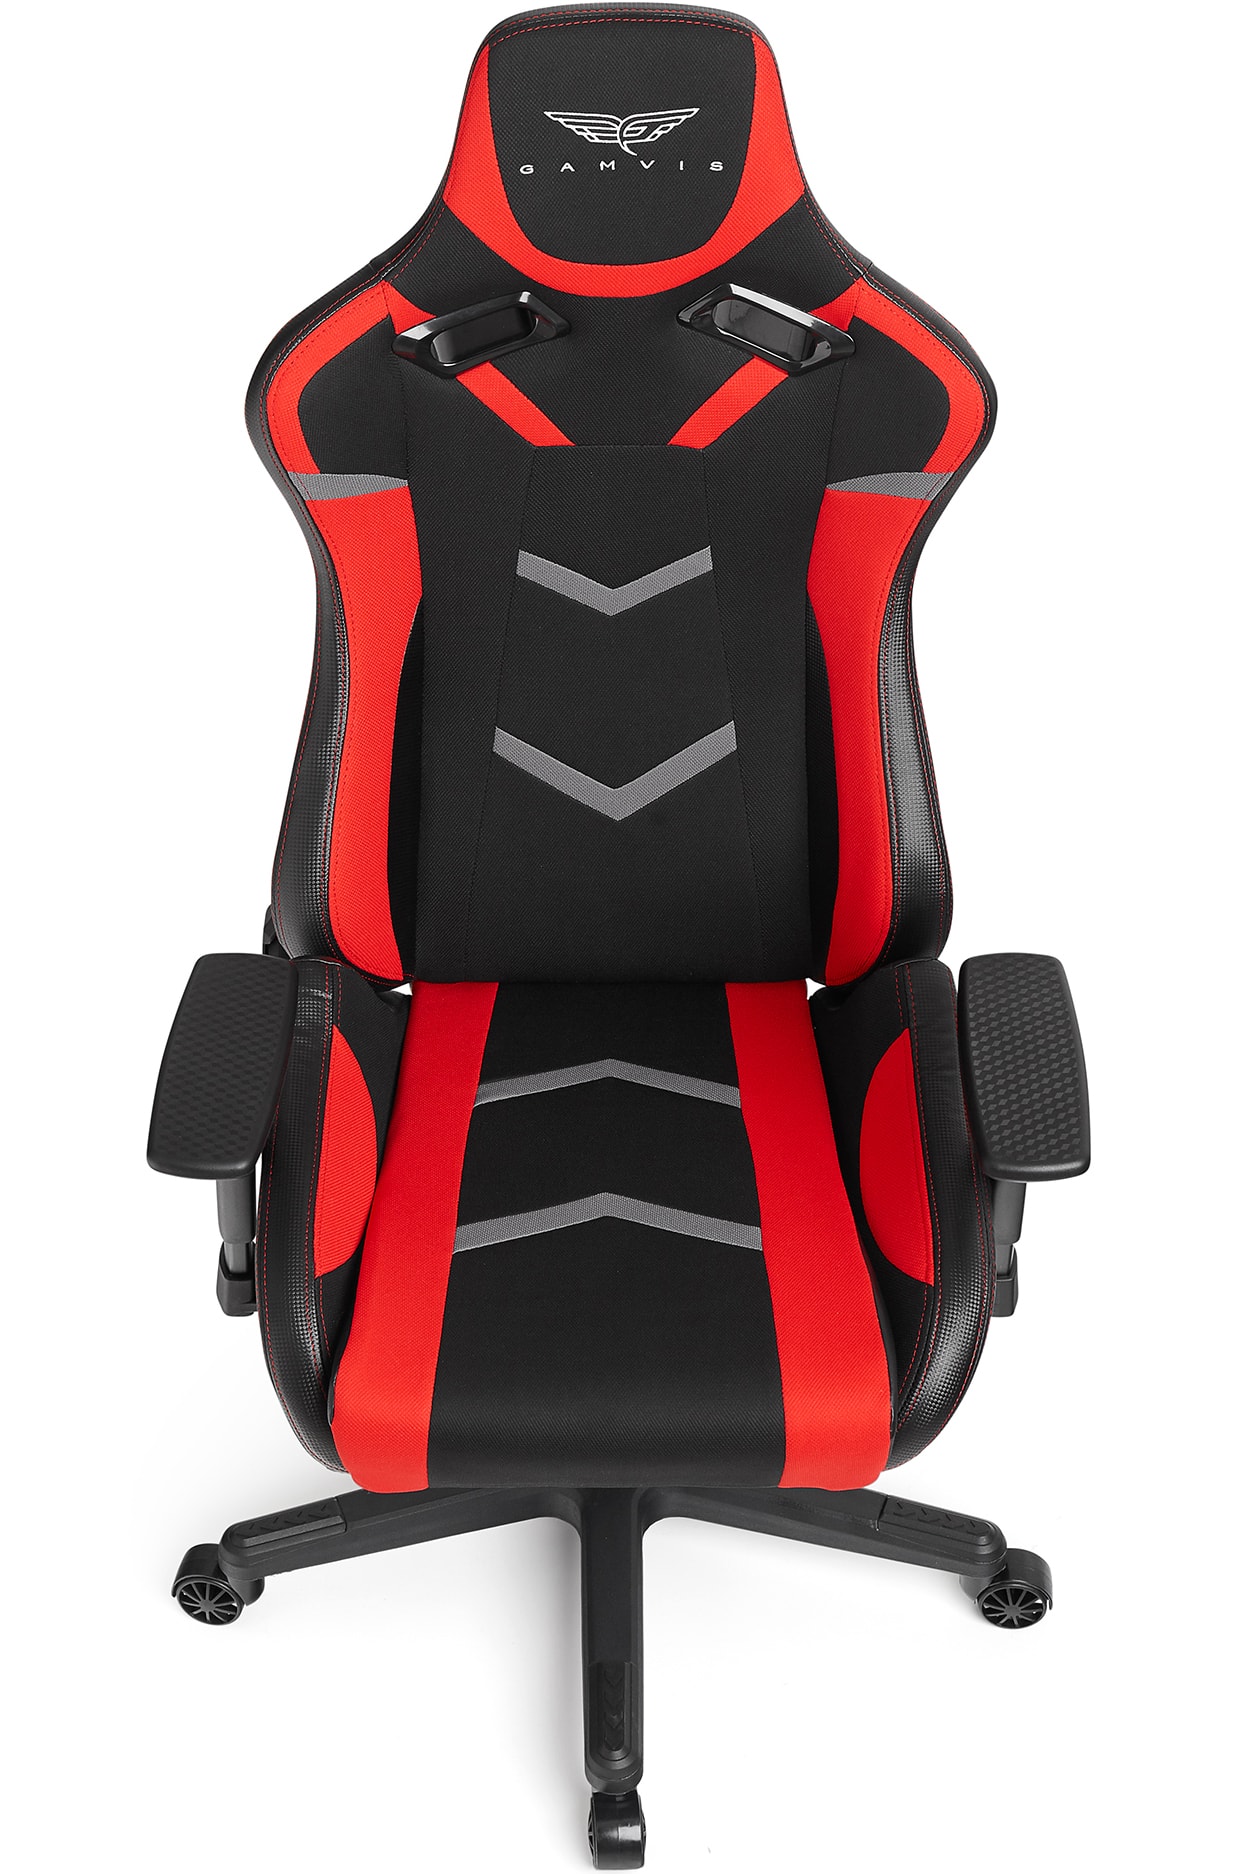 Gamvis Furioso Fabric Gaming Chair Black Red Gray Gamvis Gaming Chairs